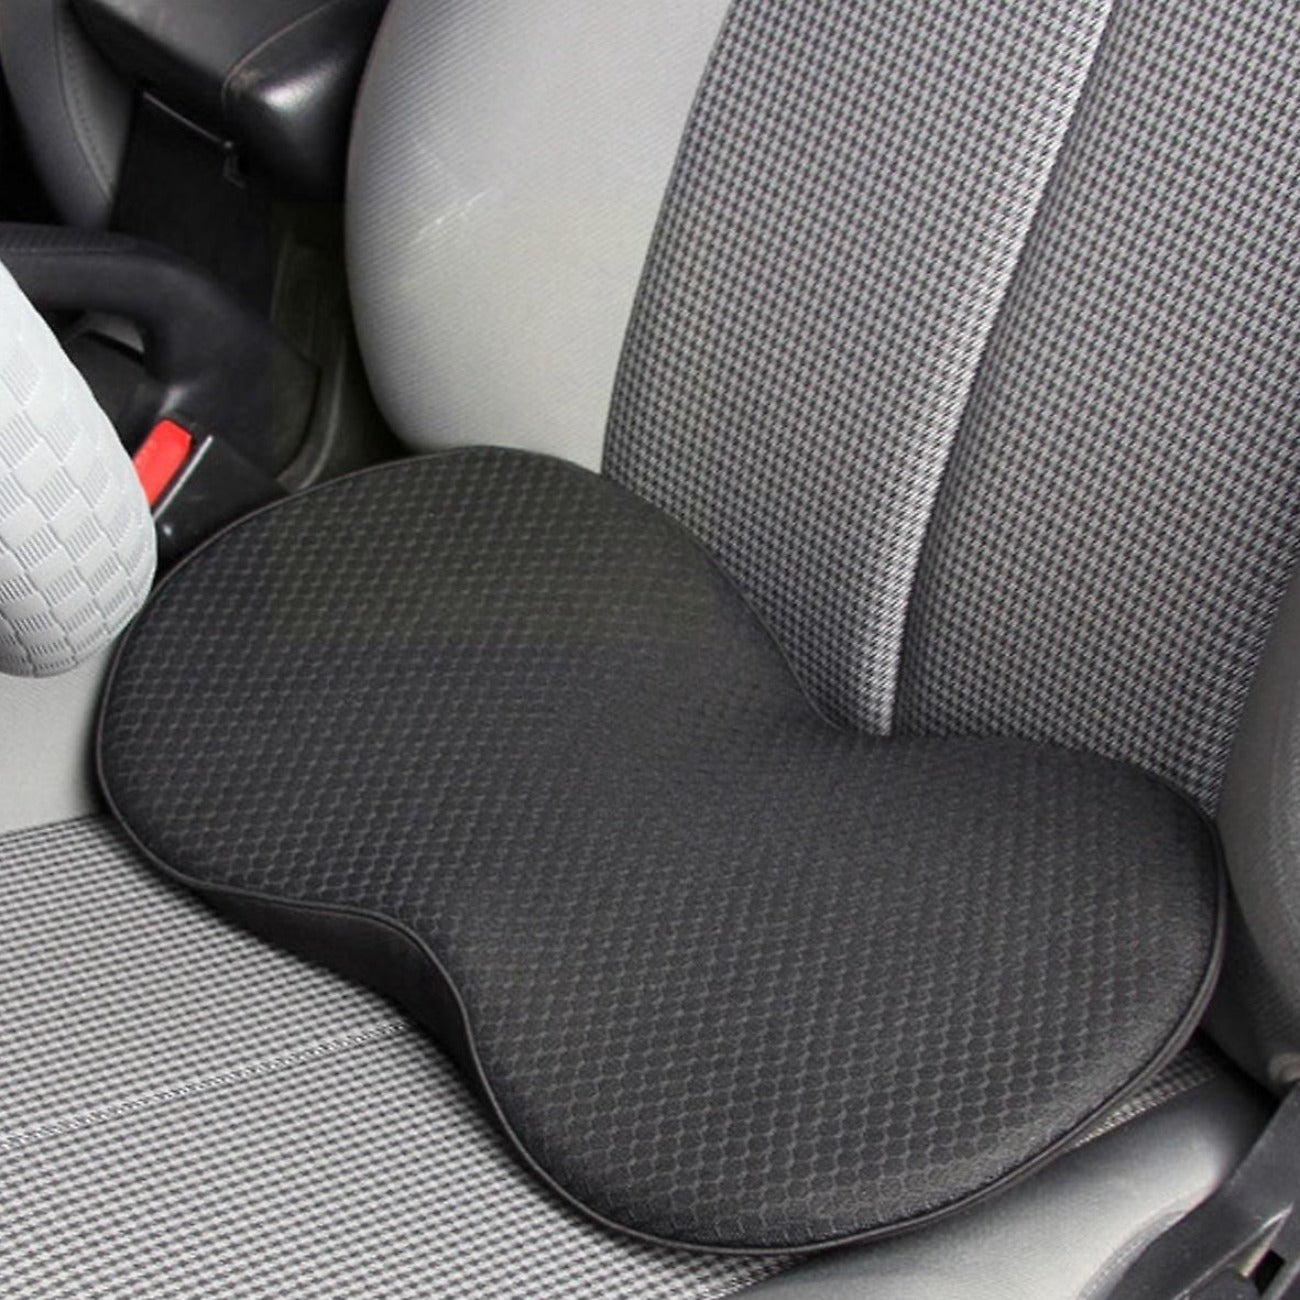 7 Best Car Seat Cushions for Short Drivers (Raise Height)